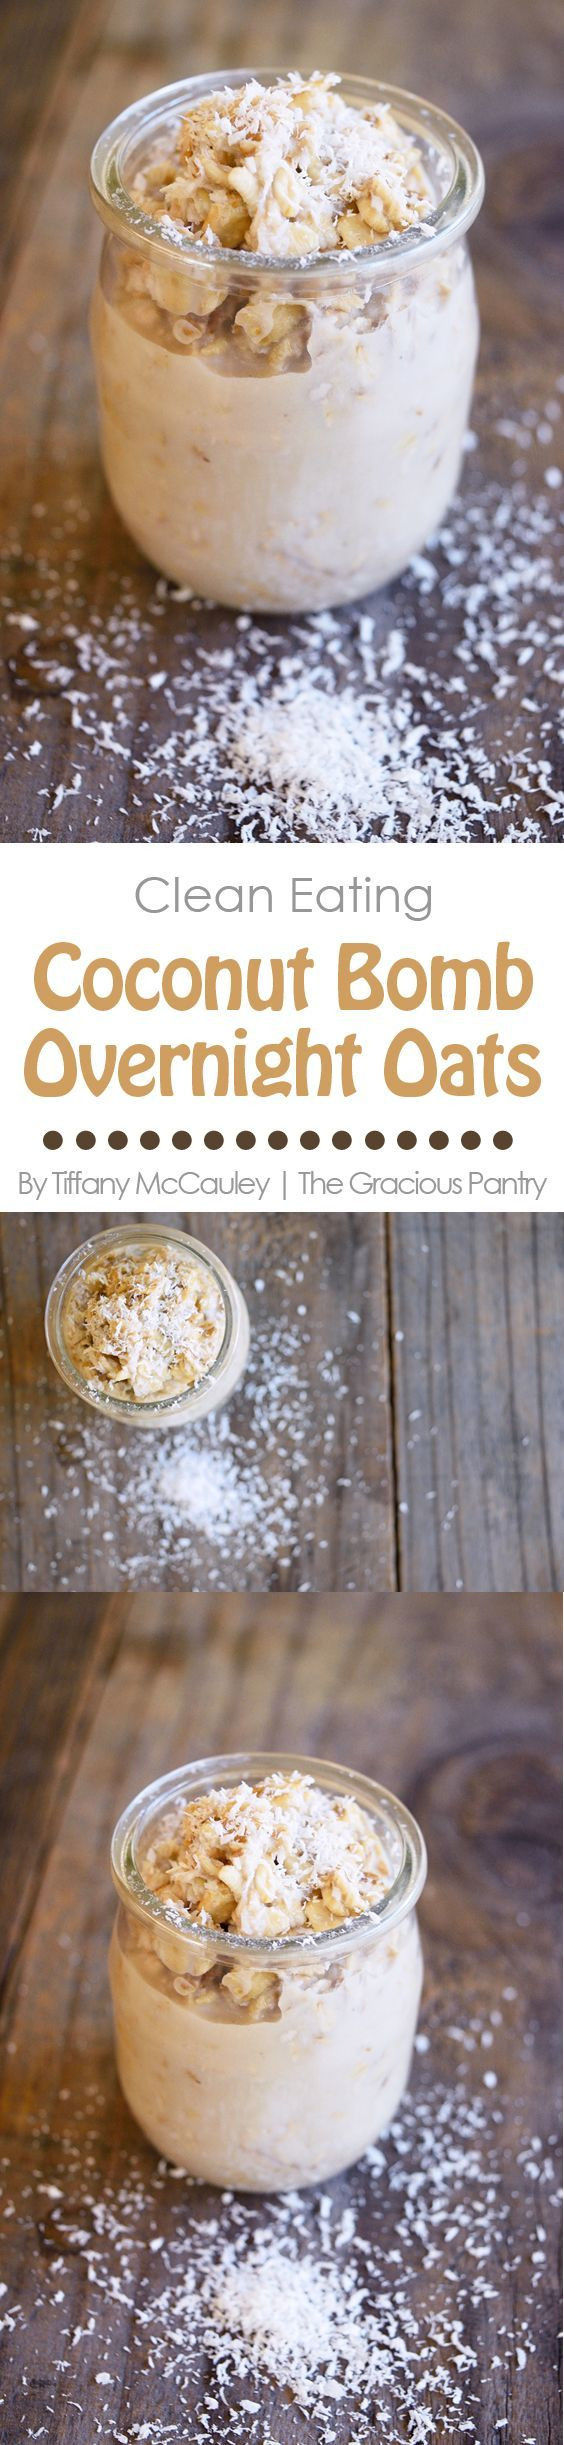 Clean Eating Oatmeal
 65 best Clean Eating Freezer Meals images on Pinterest